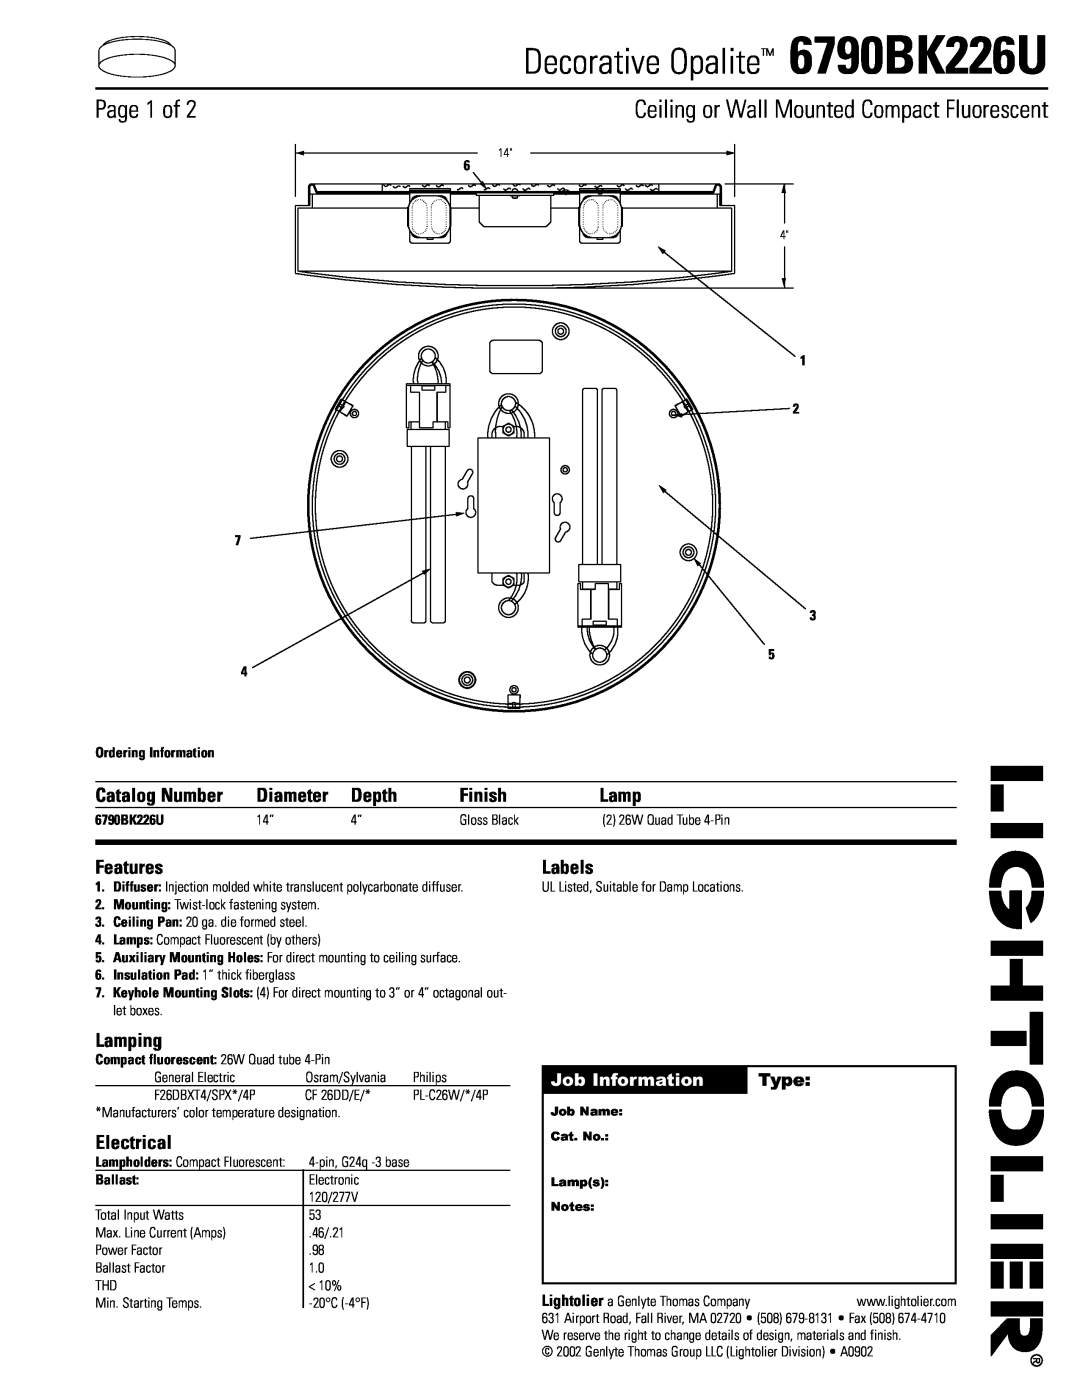 Lightolier 6790BK226U manual Page 1 of, Ceiling or Wall Mounted Compact Fluorescent, Job Information, Type, Ballast, Depth 